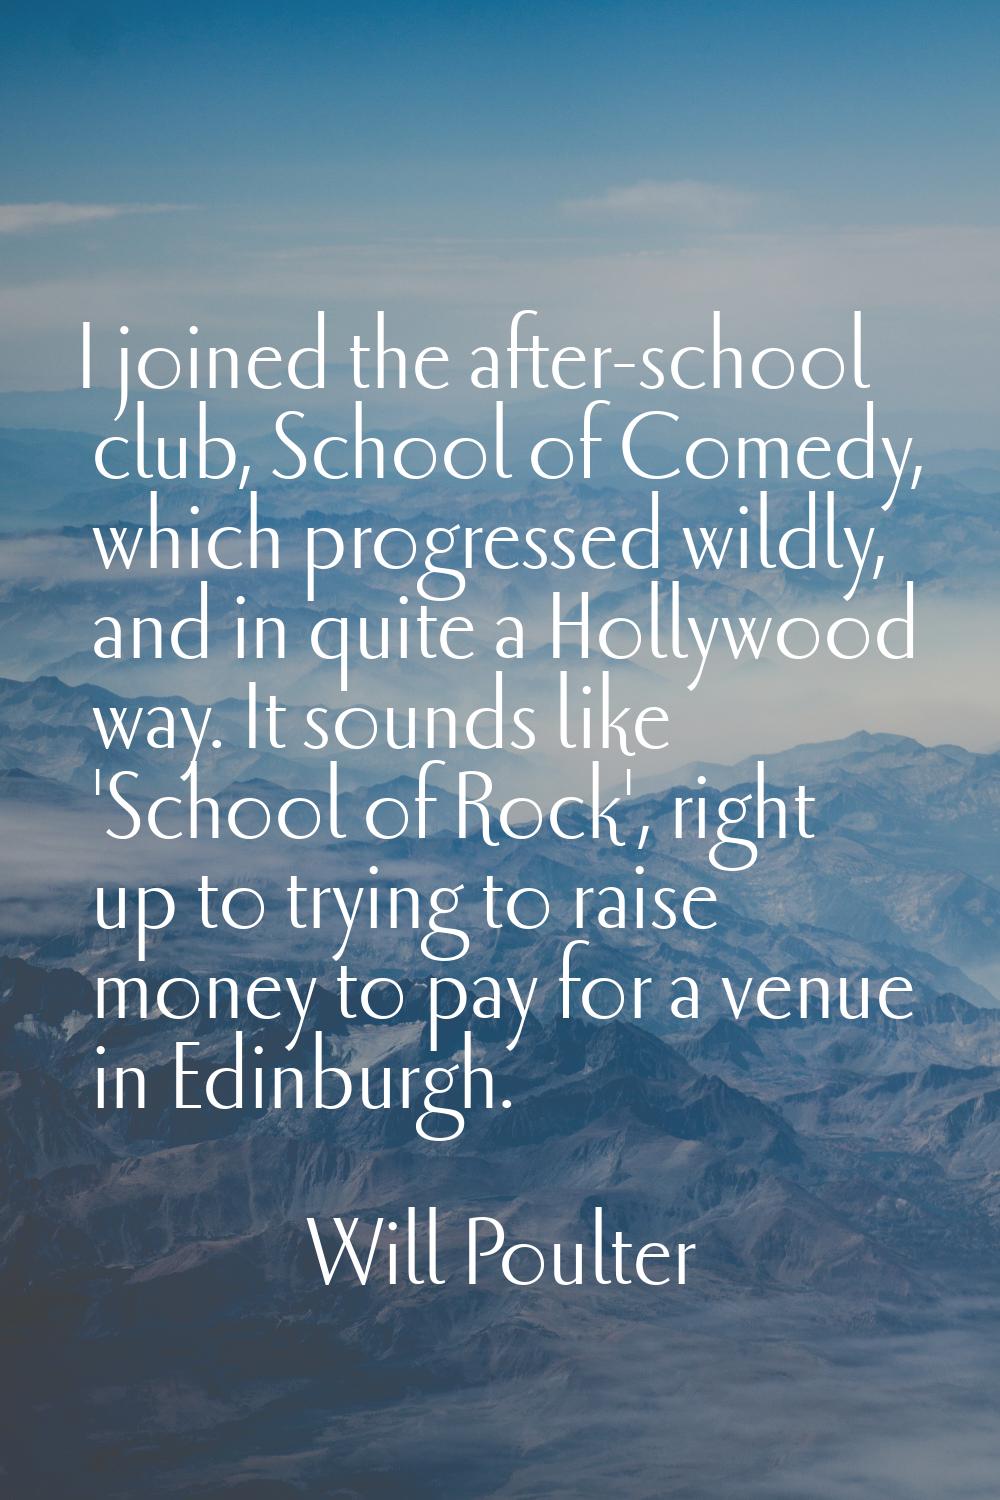 I joined the after-school club, School of Comedy, which progressed wildly, and in quite a Hollywood